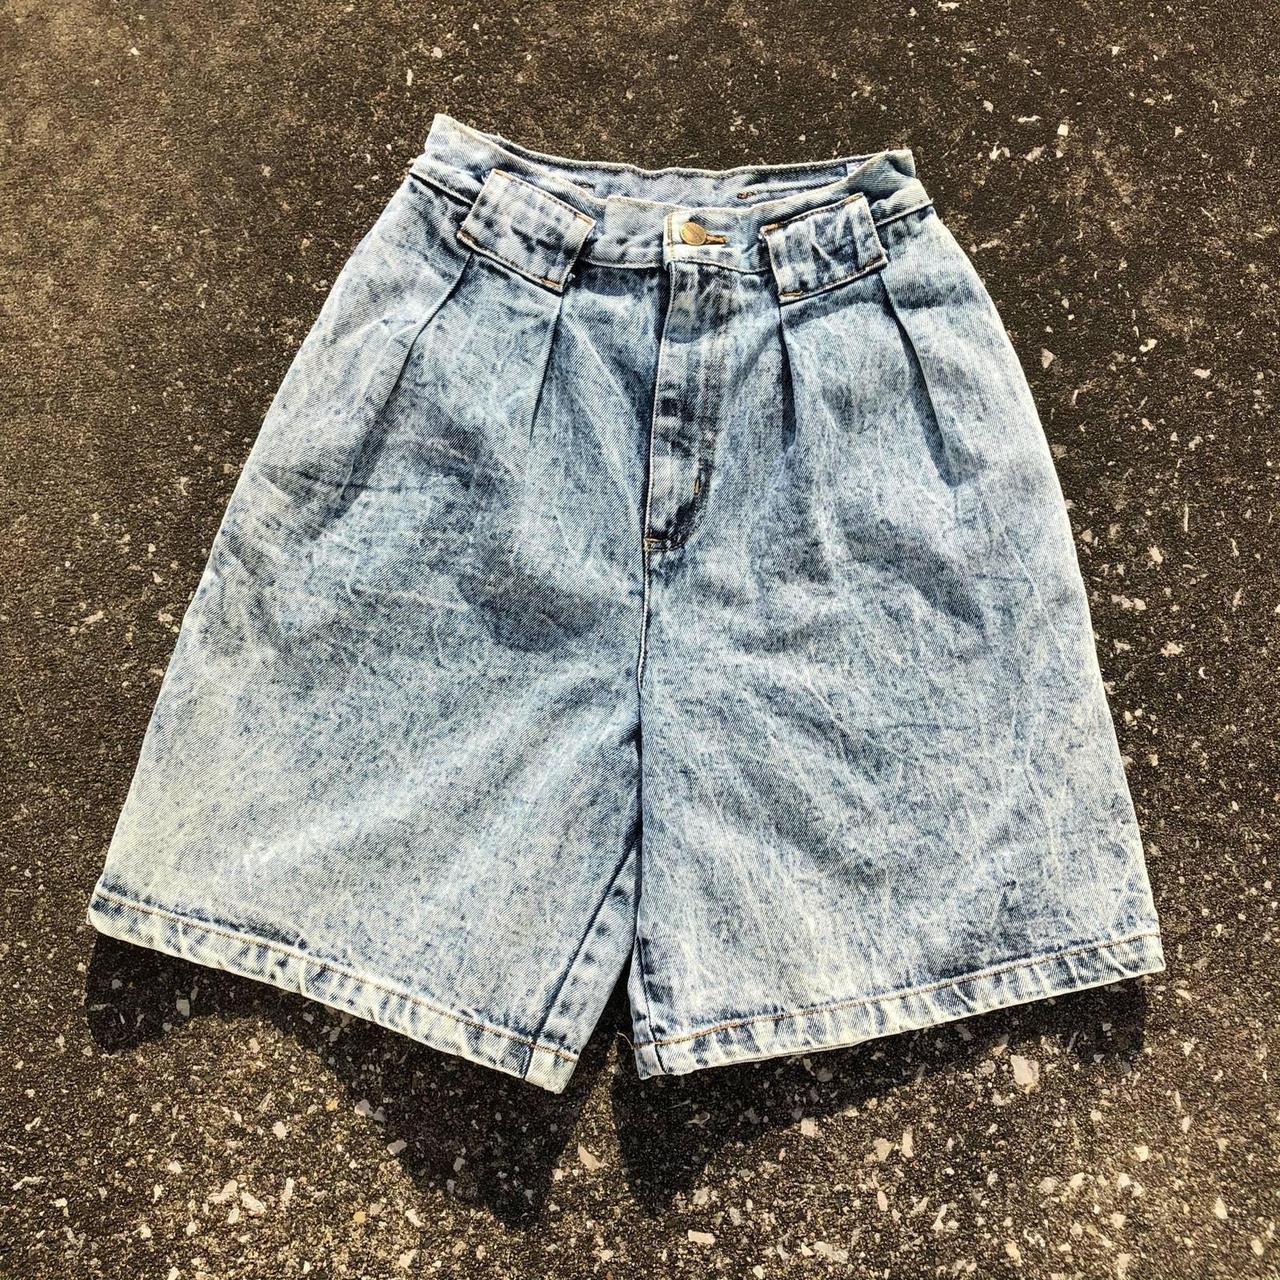 Chic 90s Acid Wash Pleated Shorts Chic Women's High... - Depop